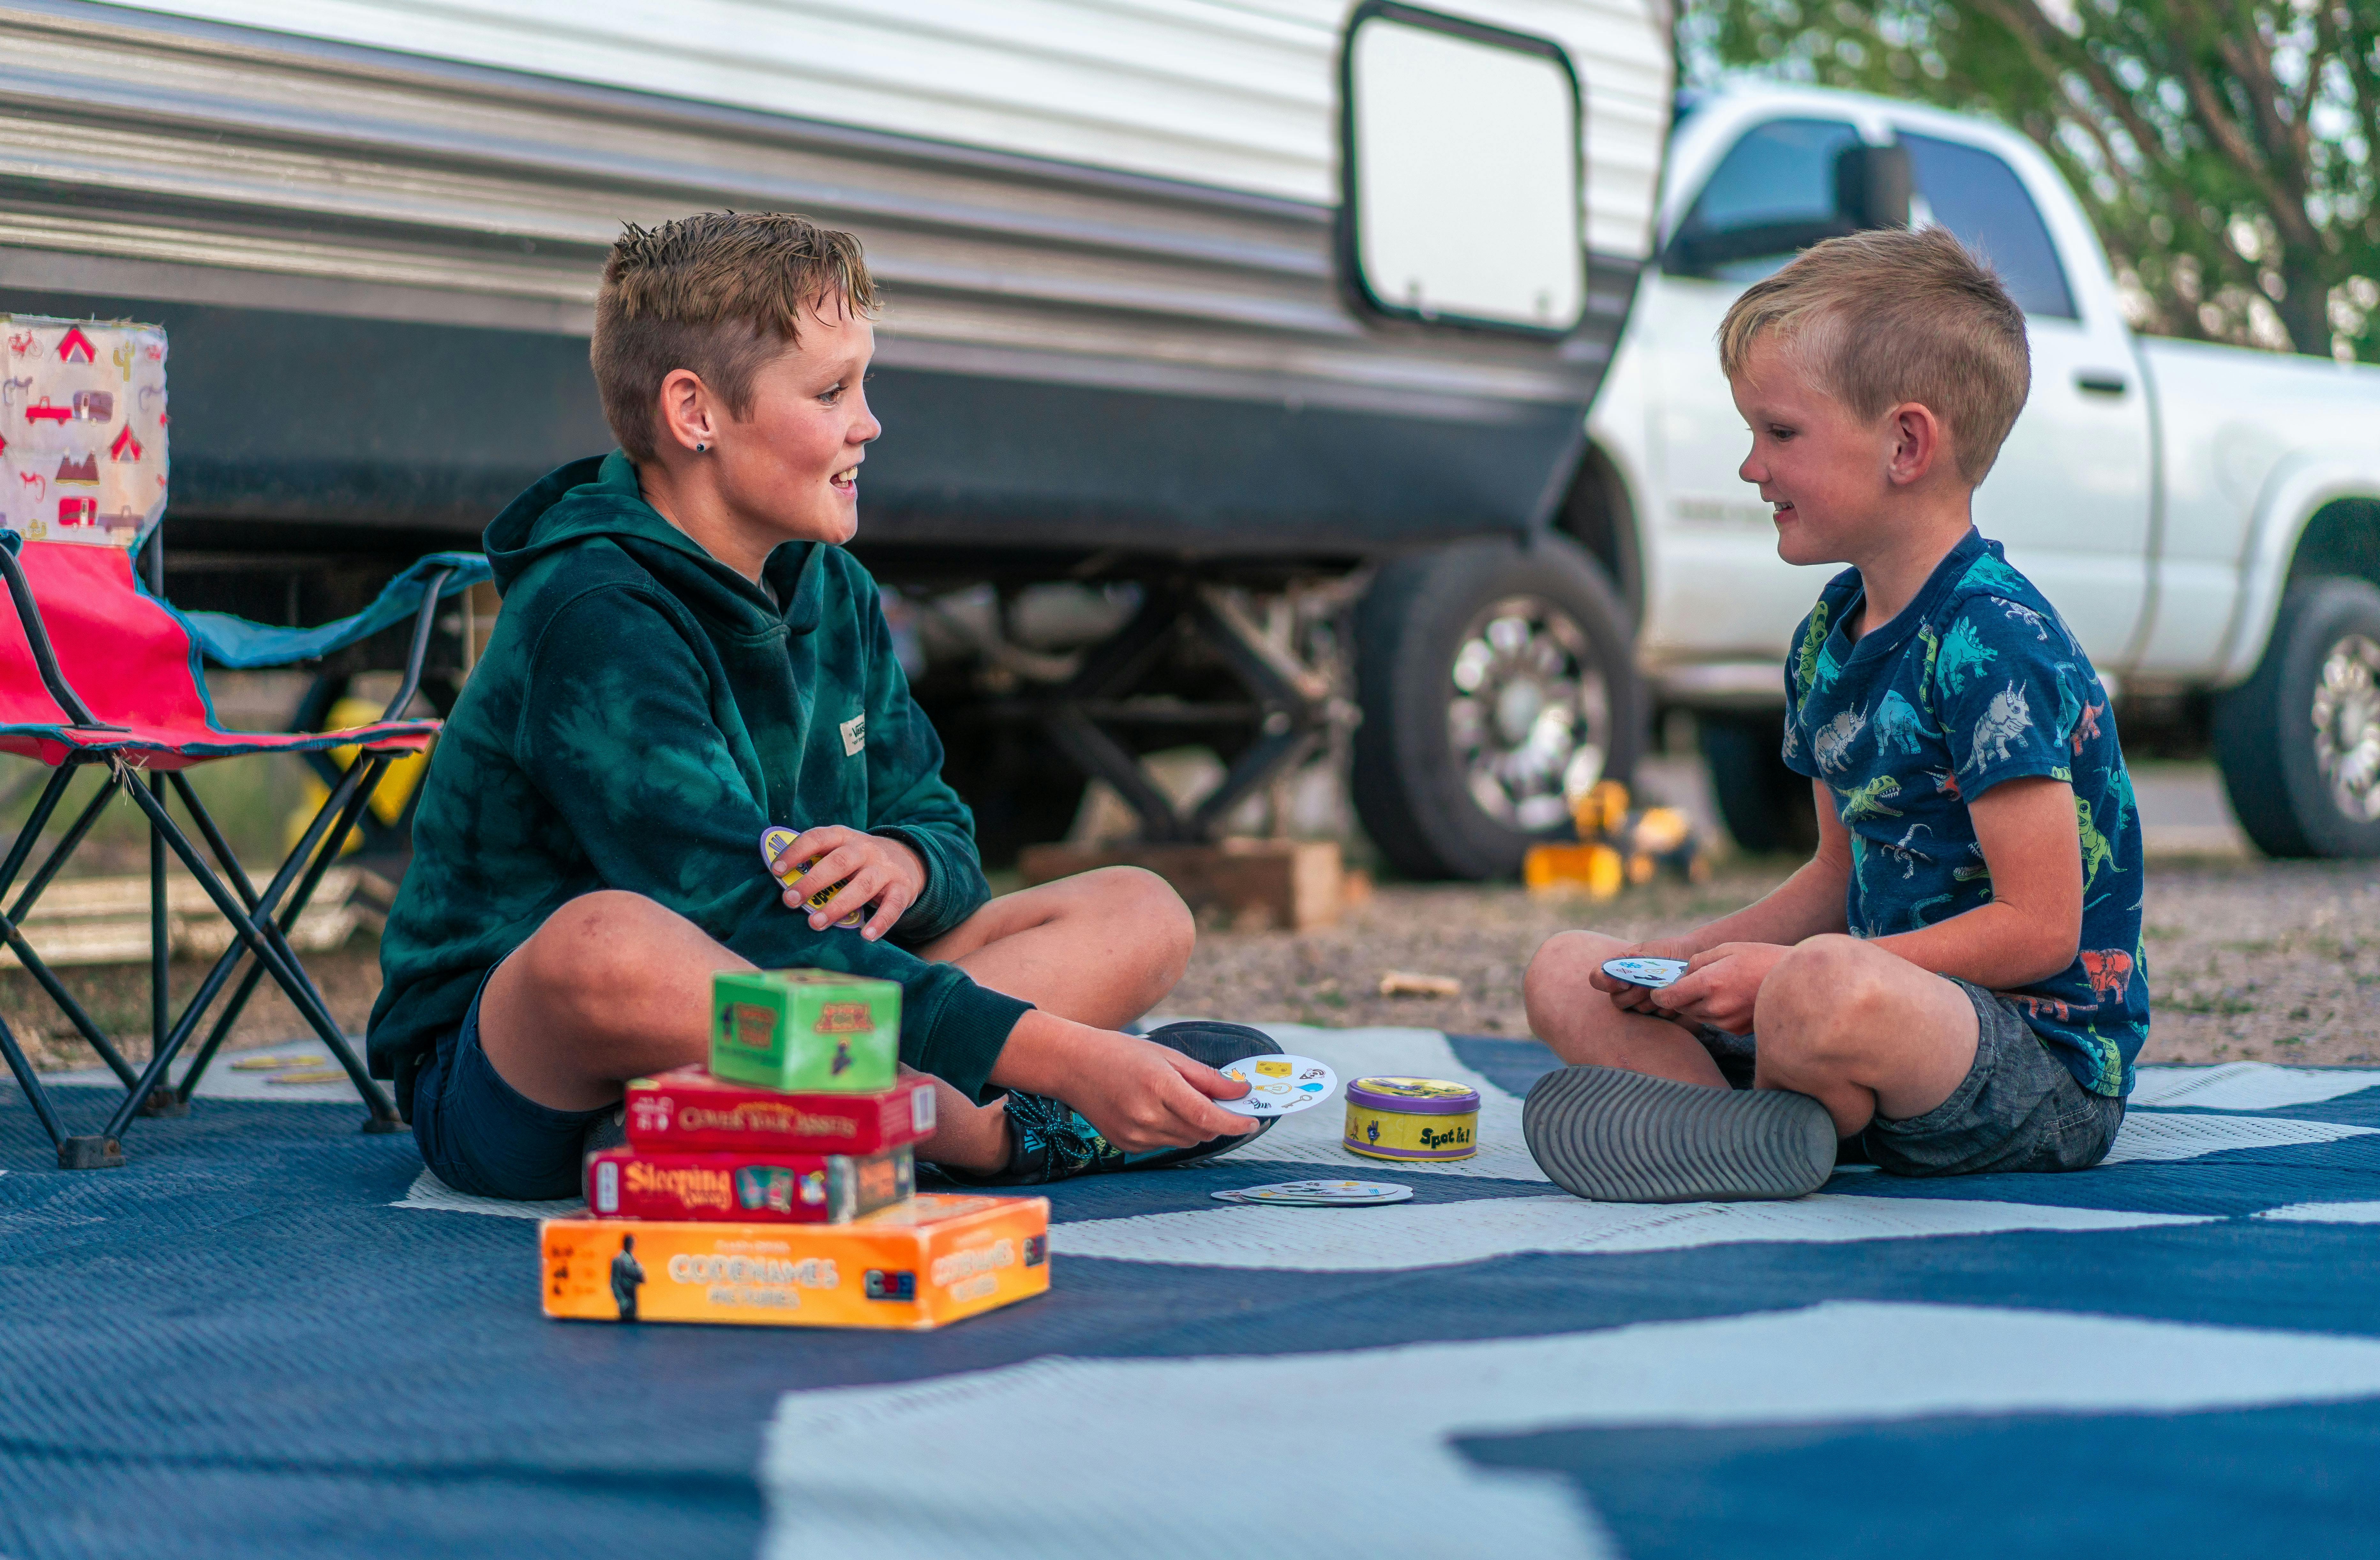 The Renee Tilby kids playing games outside of their Jayco Jay Flight Travel Trailer